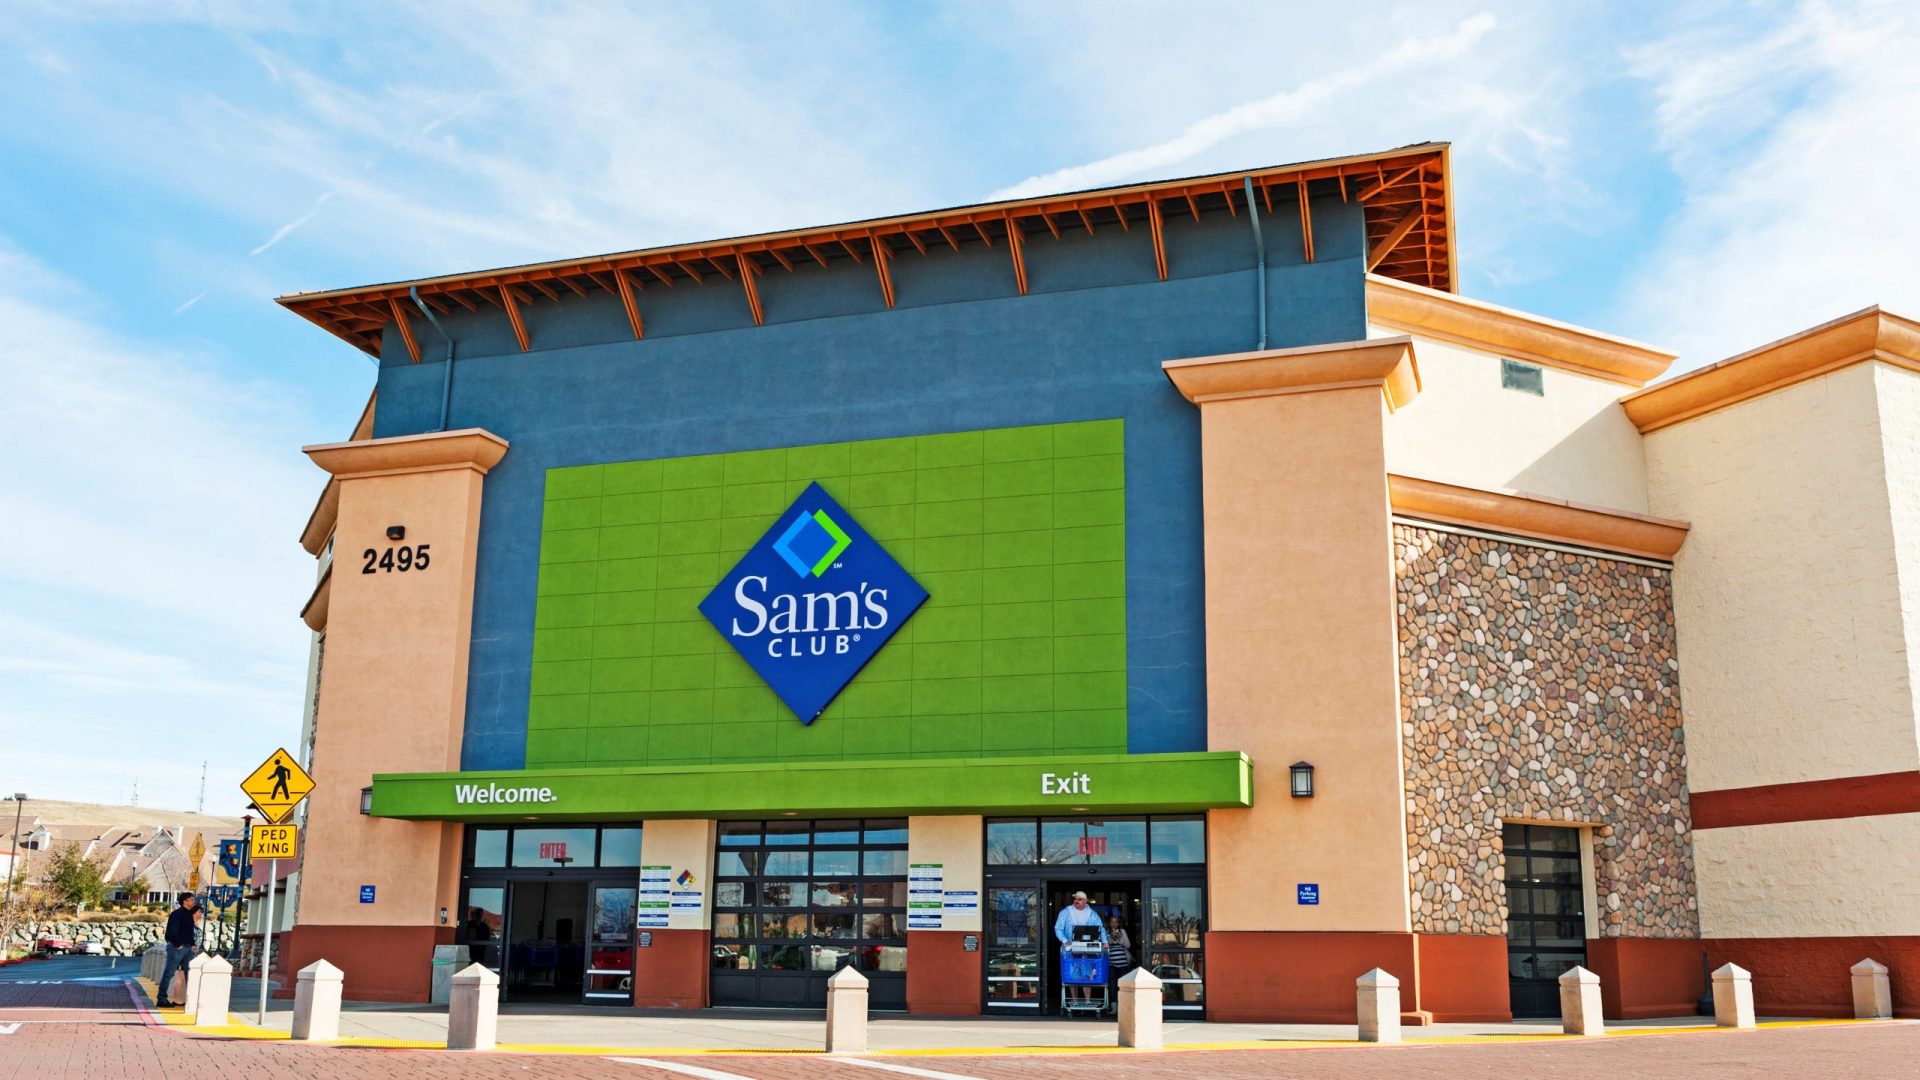 Limited Time Offer: Join Sam's Club for Only $10 During Anniversary Celebration